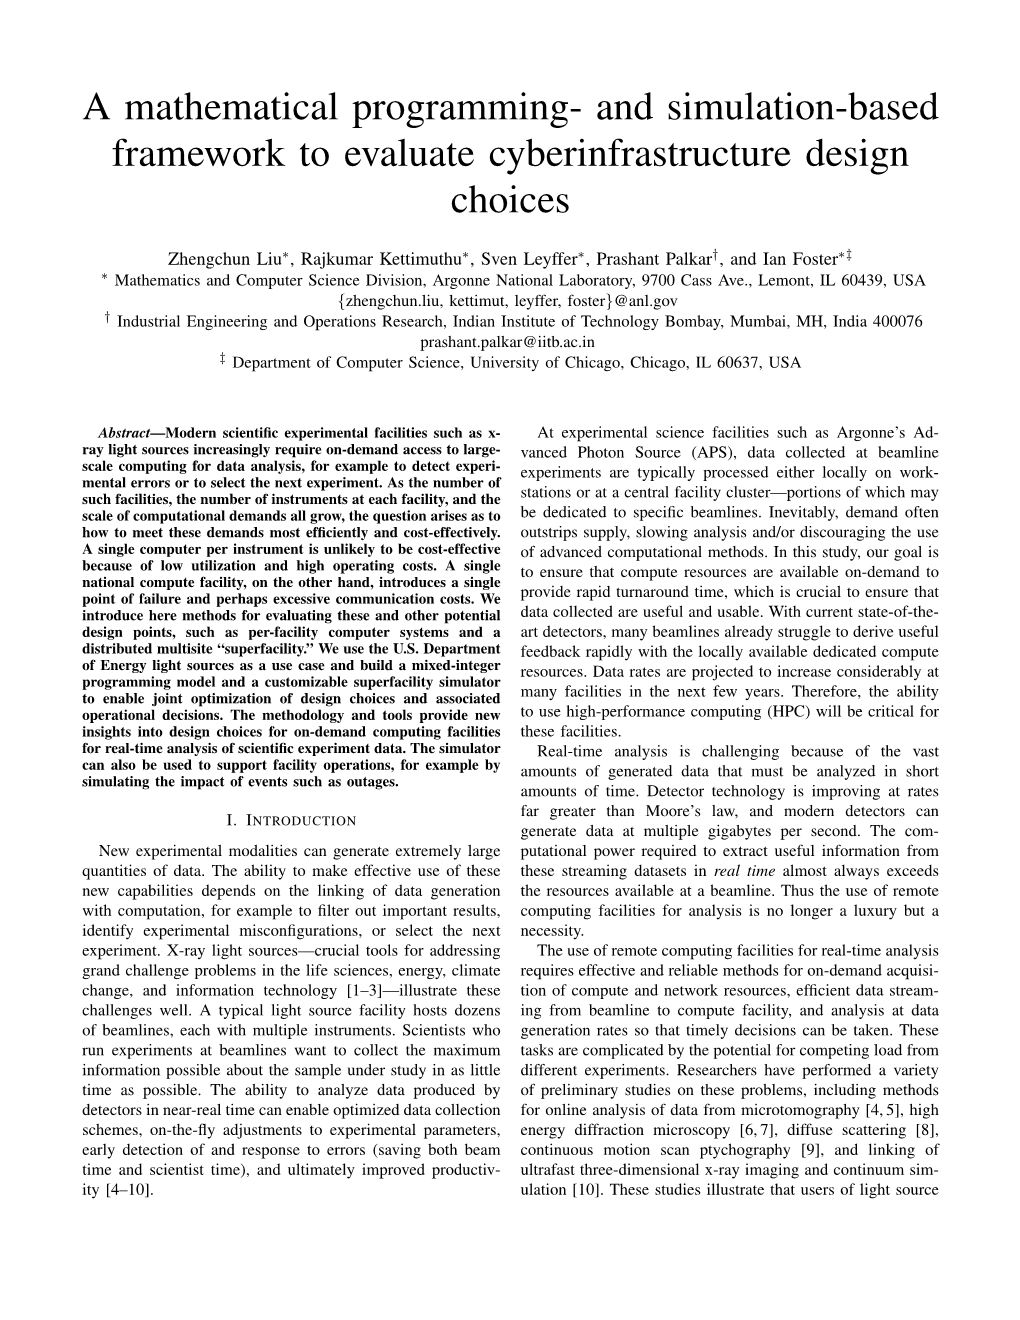 A Mathematical Programming- and Simulation-Based Framework to Evaluate Cyberinfrastructure Design Choices